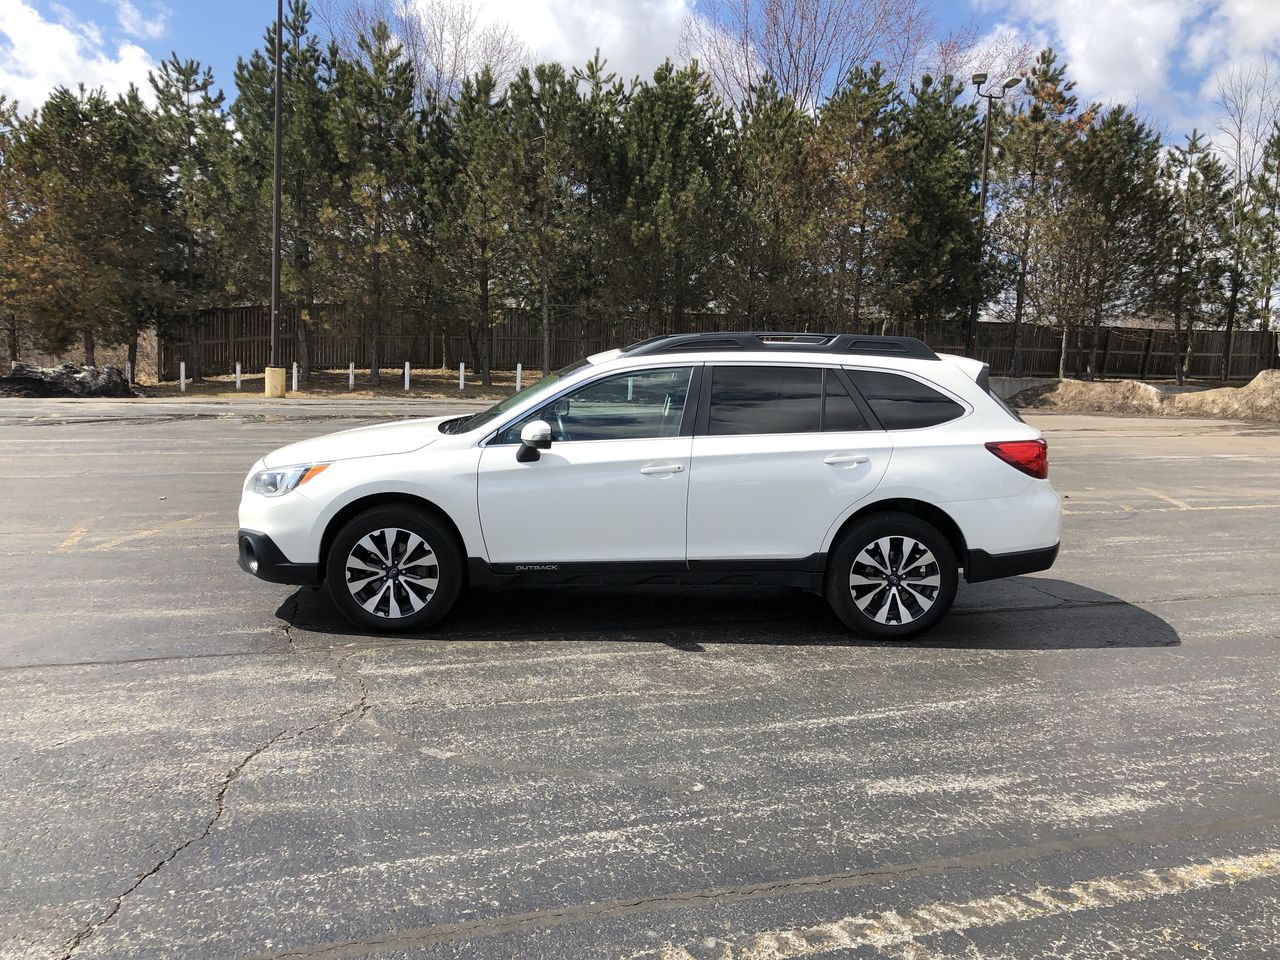 Used 2015 Subaru OUTBACK 3.6R LIMITED AWD in Cayuga,ON